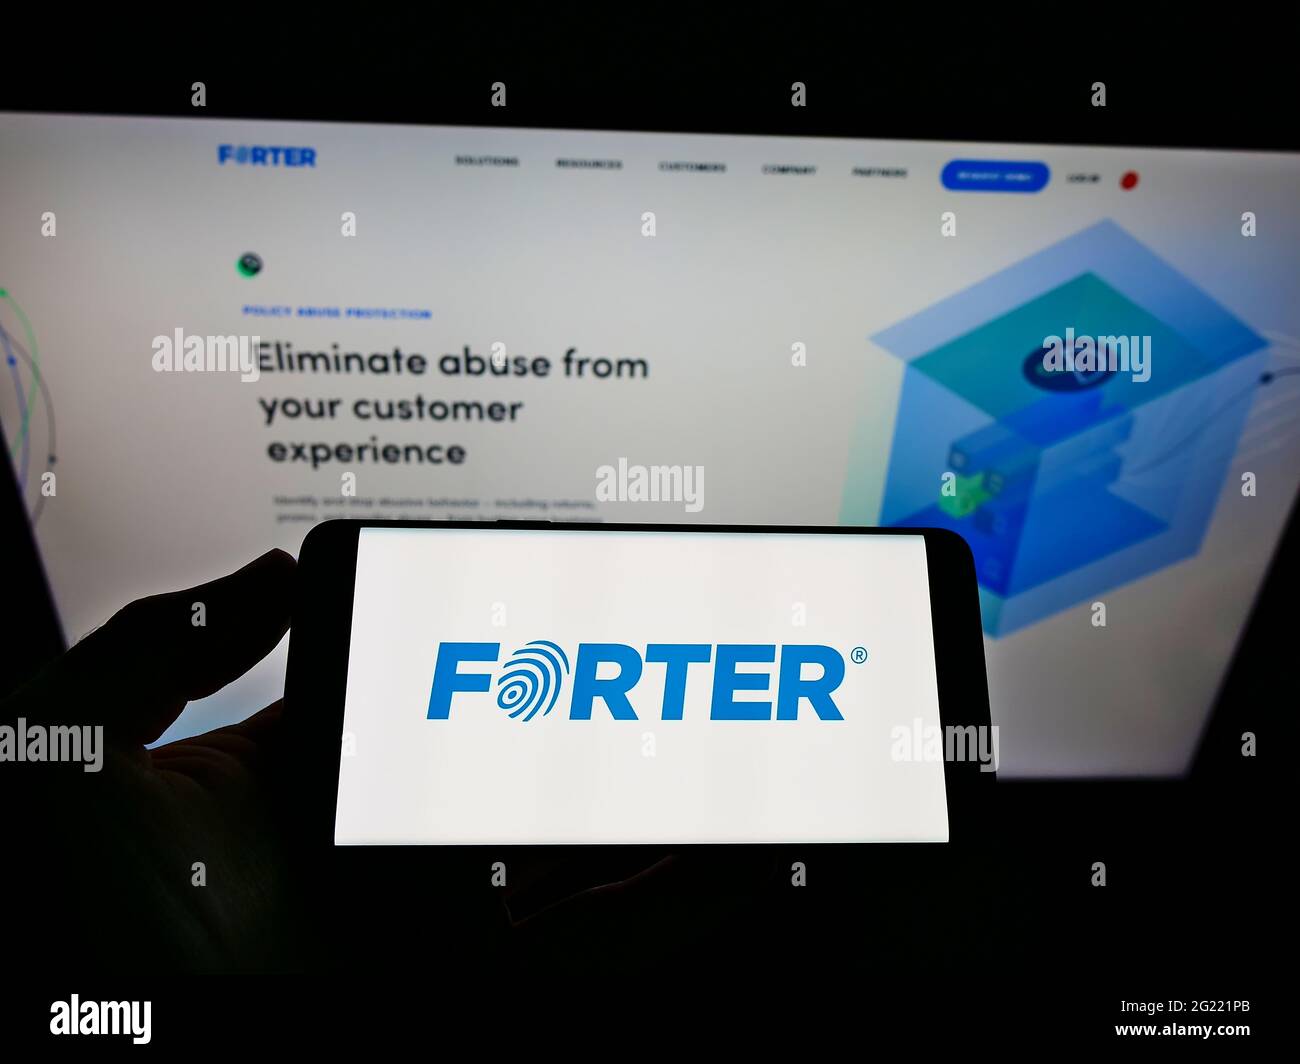 Person holding cellphone with logo of fraud prevention software company Forter Inc. on screen in front of business webpage. Focus on phone display. Stock Photo